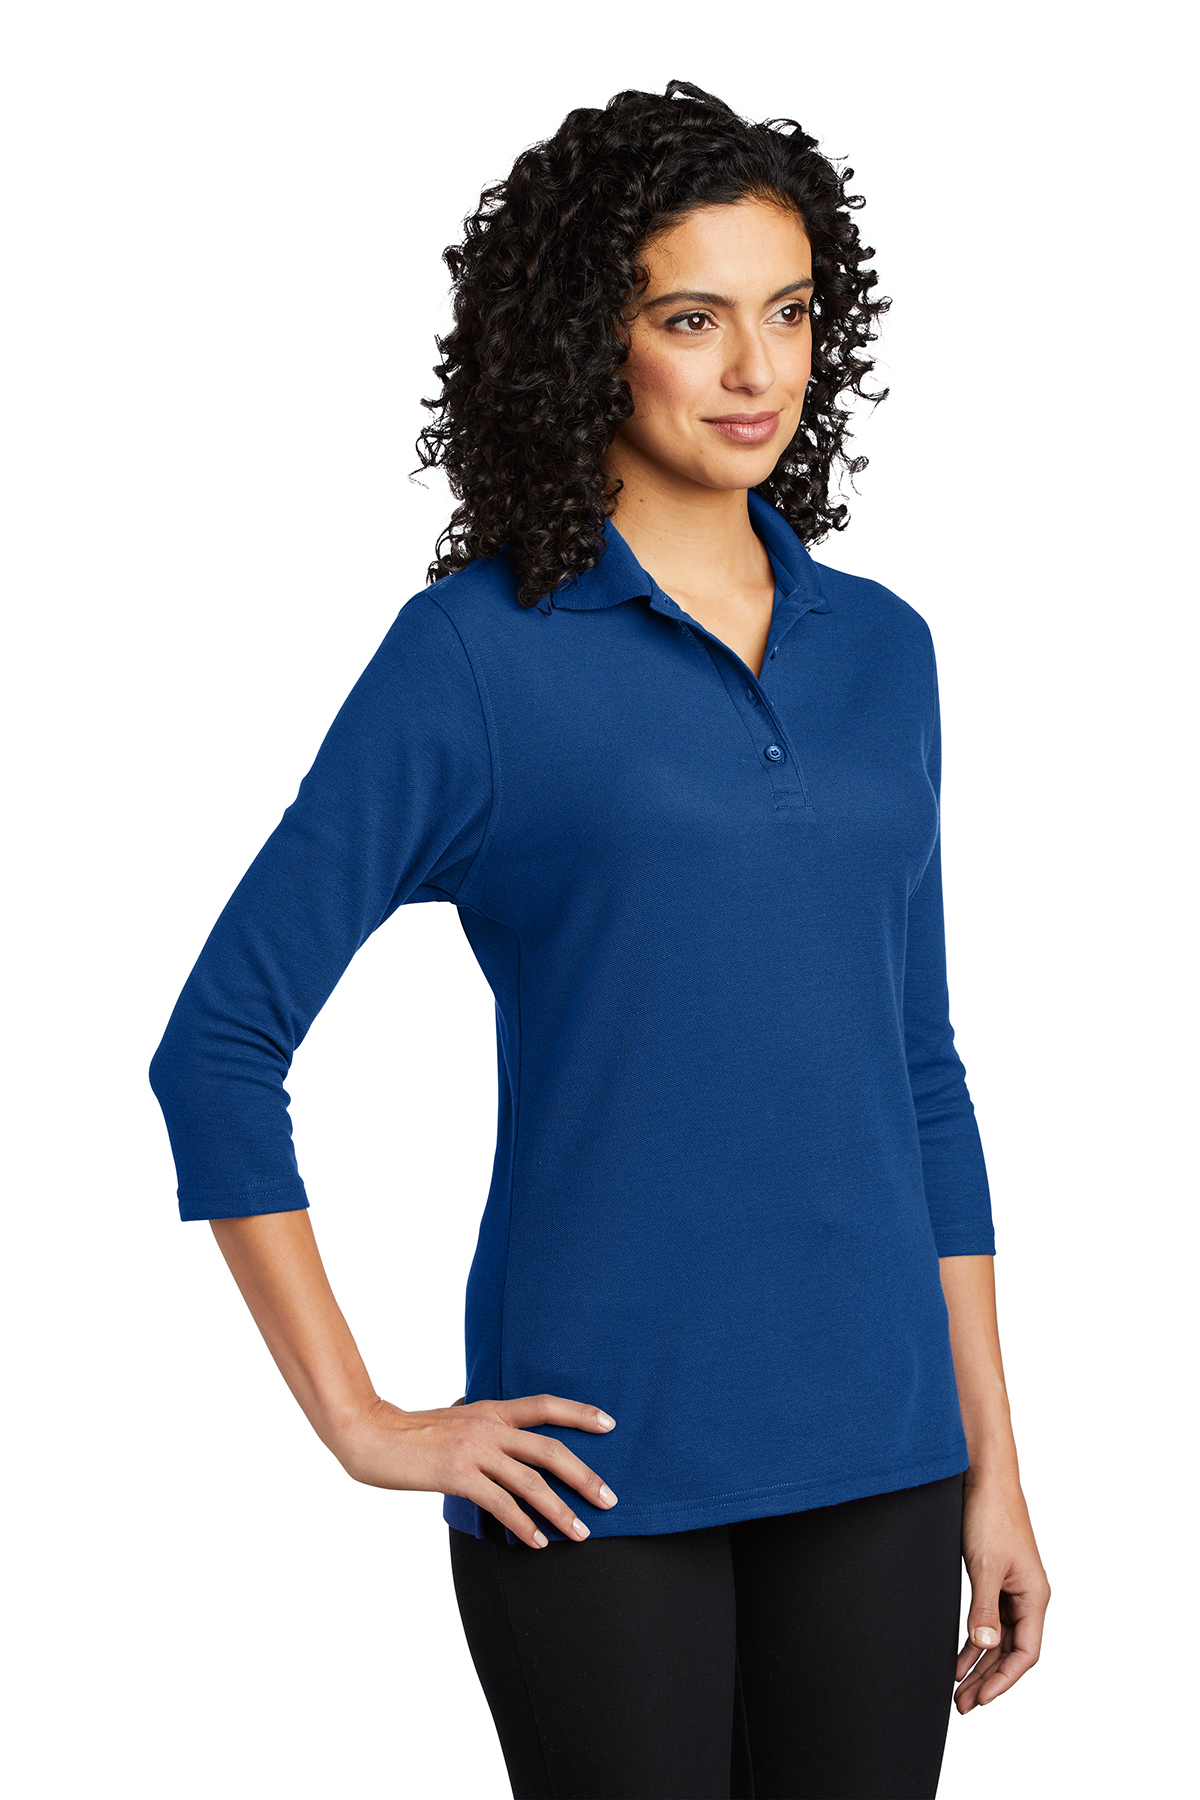 Port Authority Ladies Silk Touch™ 3/4-Sleeve Polo | Product | SanMar